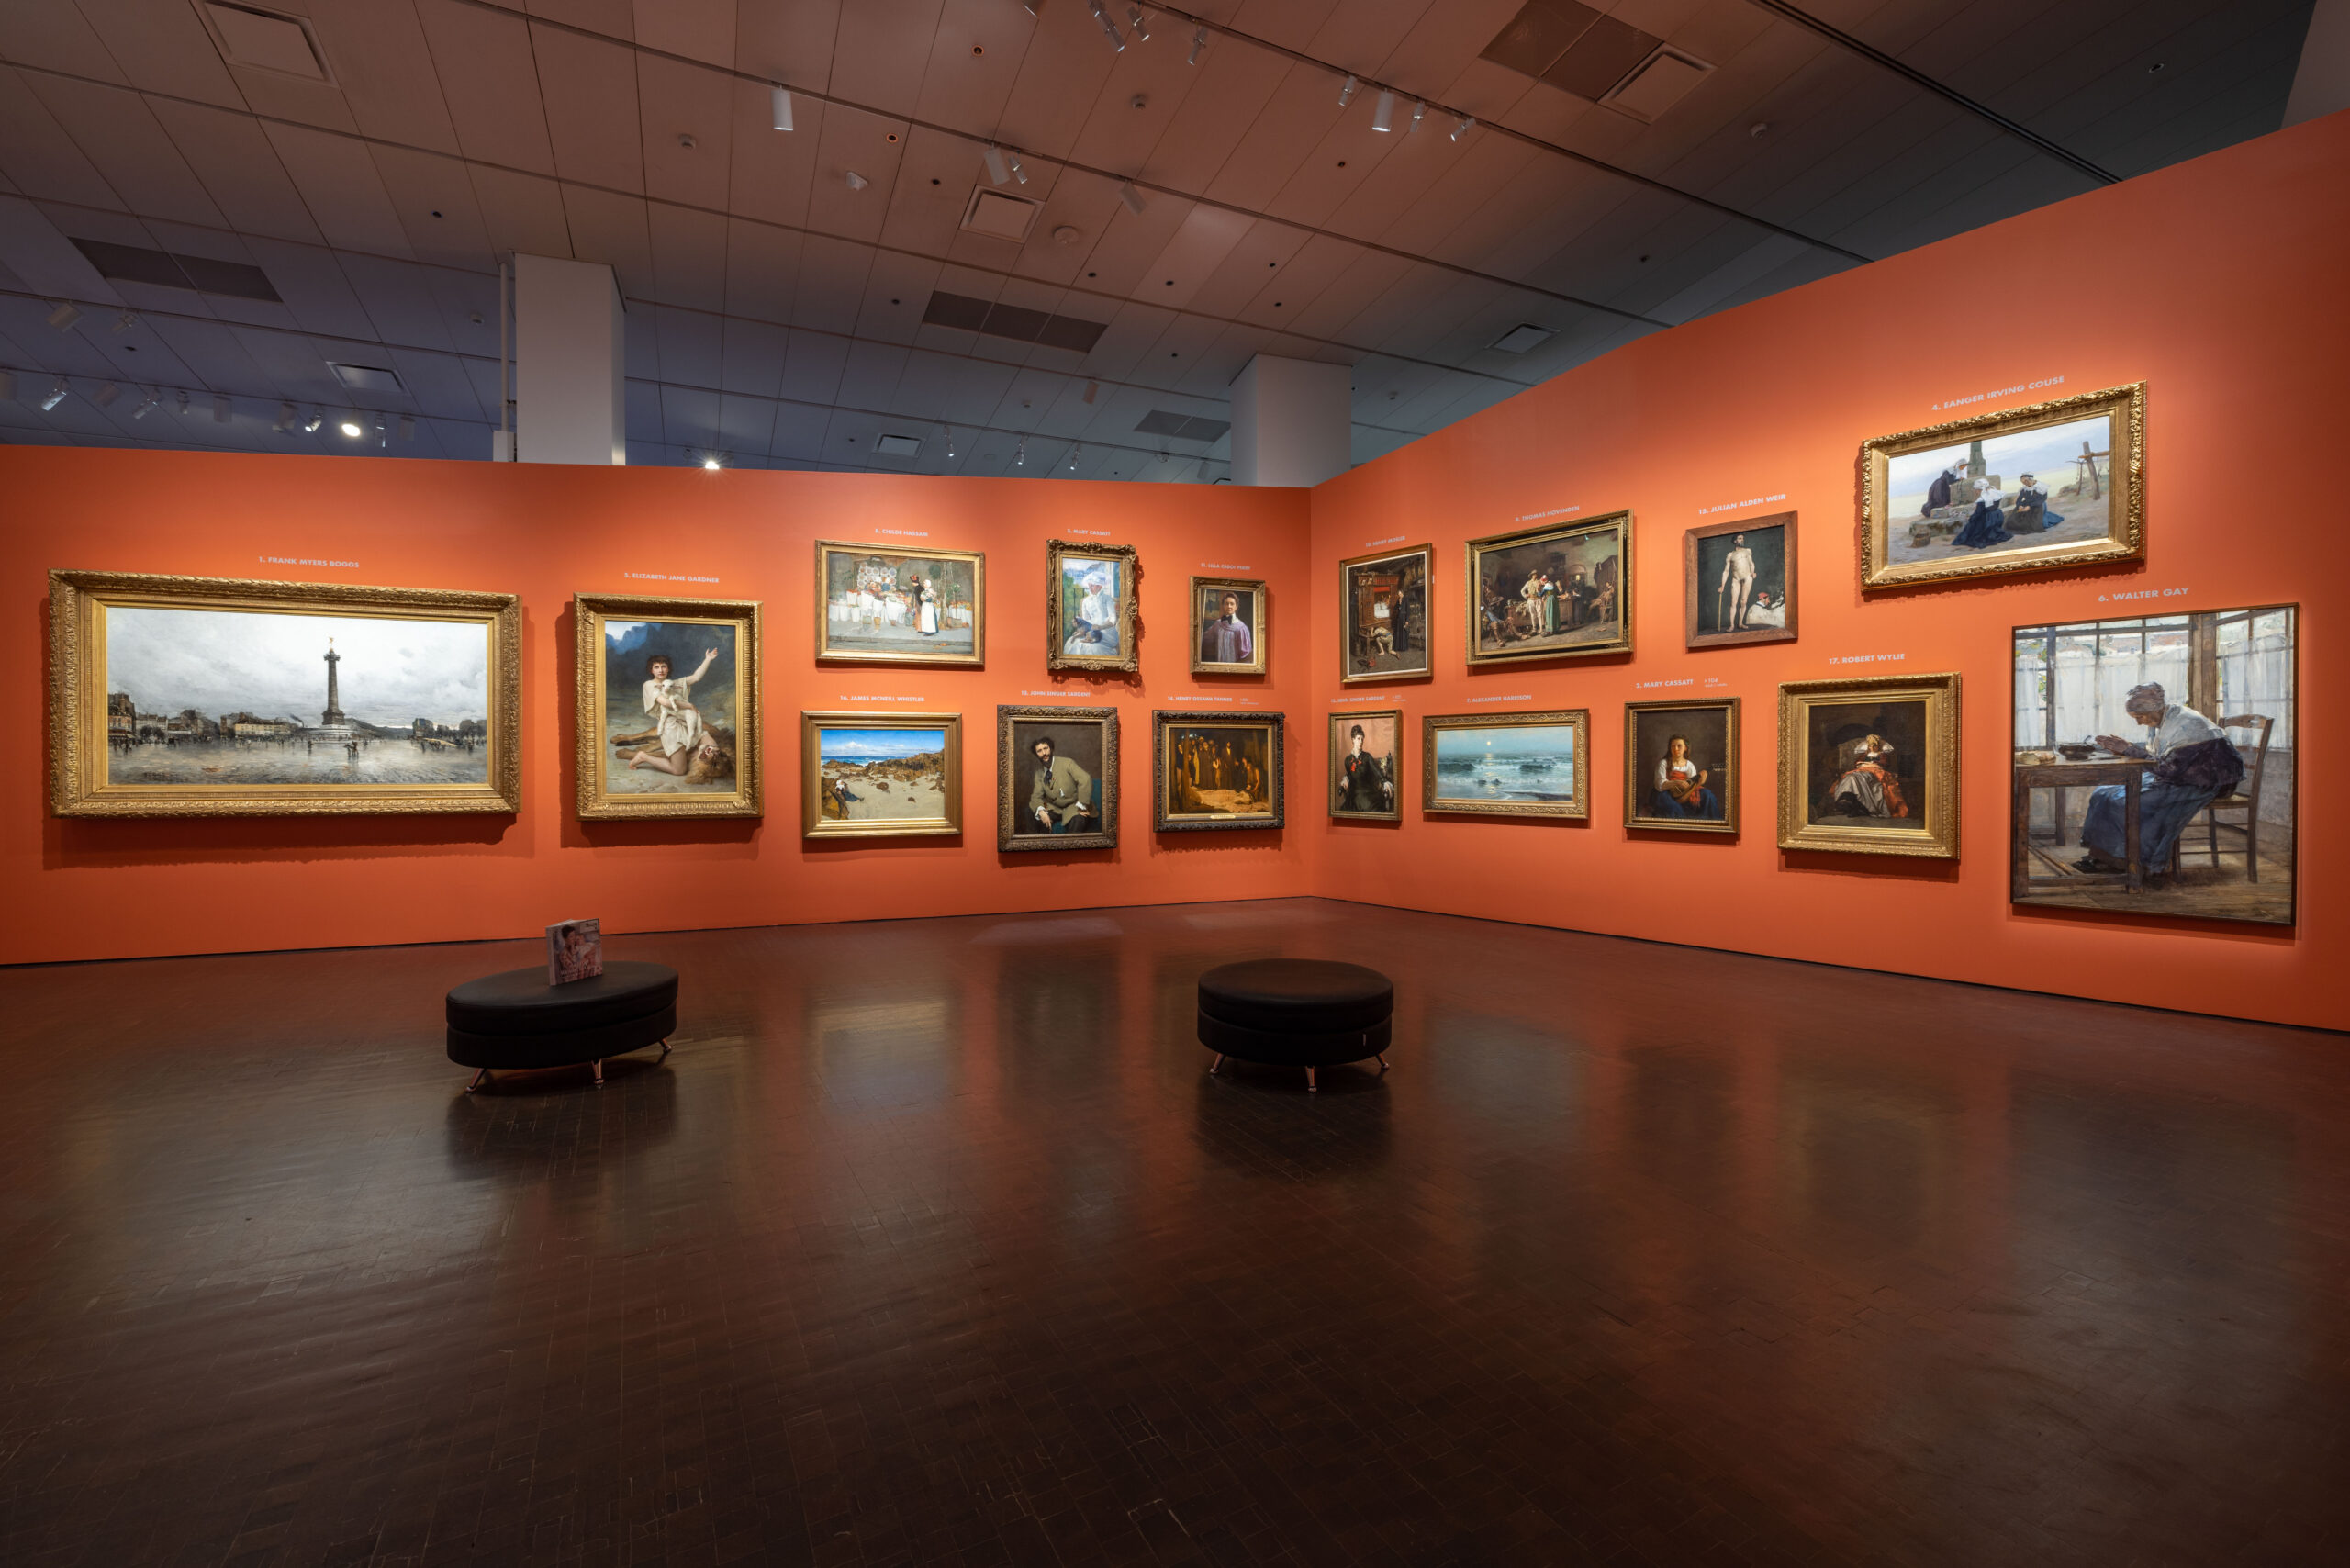 View of the interior of a museum gallery, with two temporary walls, painted orange, joined in a corner. Seventeen framed paintings are hung densely on the walls.